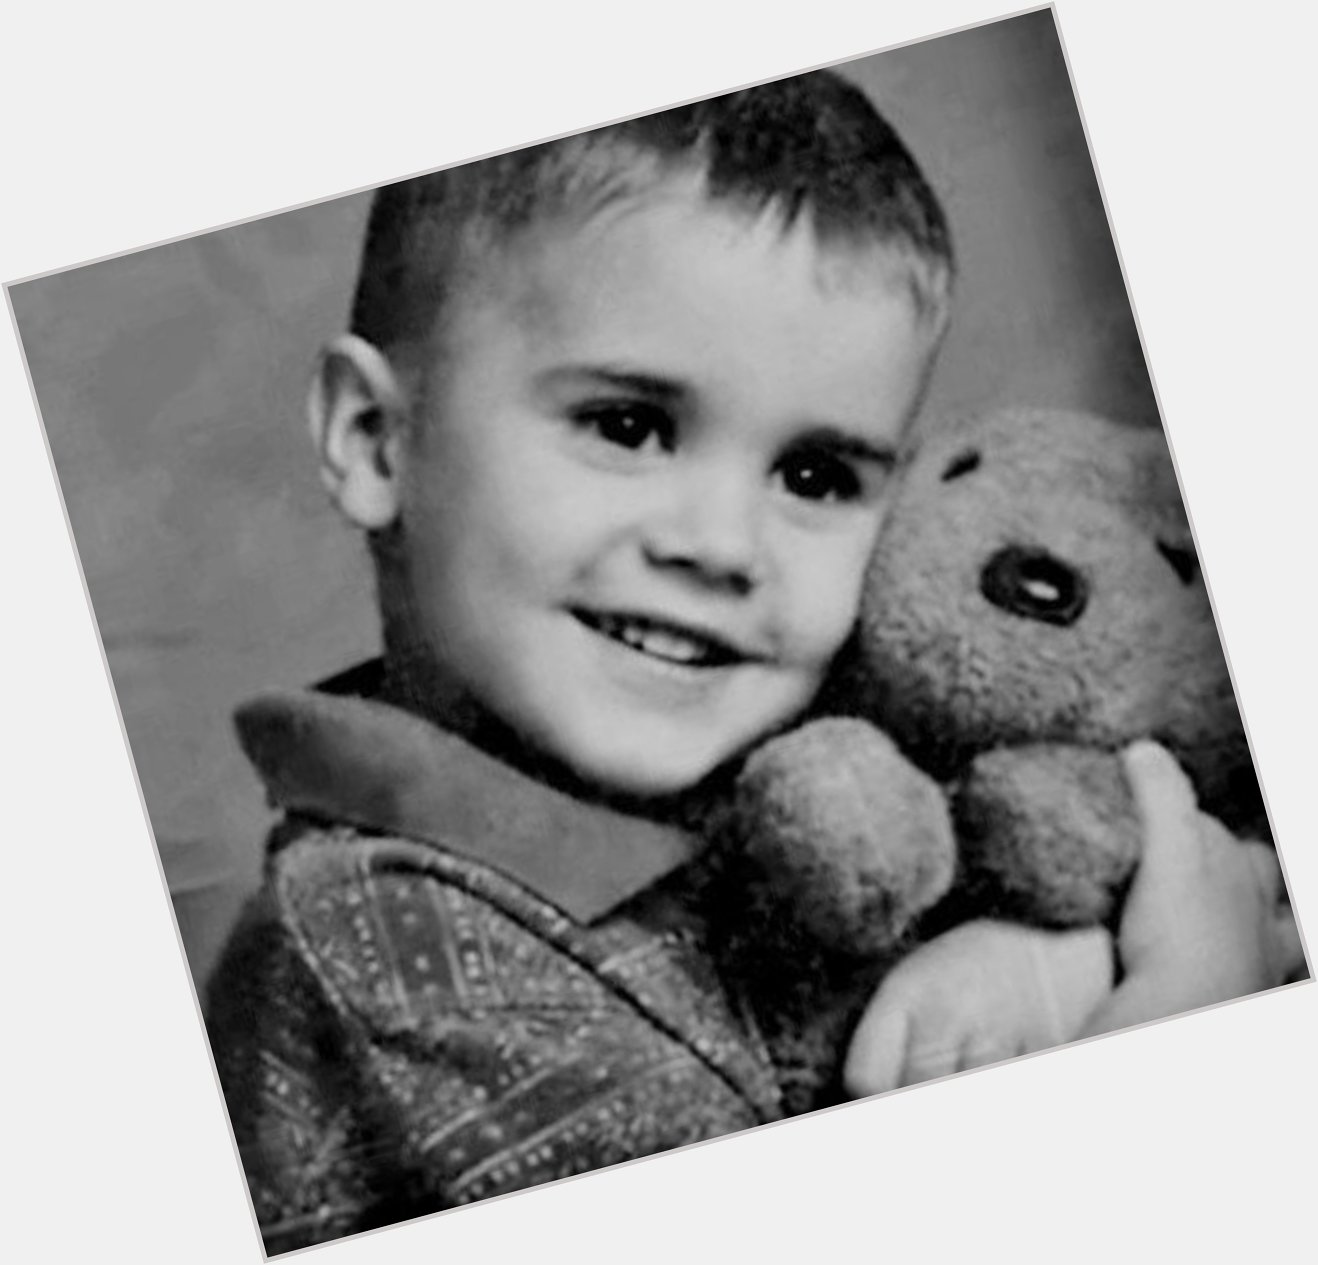 HAPPY BIRTHDAY TO BEST SINGER EVER AND ONE OF THE BEST PEOPLE ON THE EARTH... JUSTIN BIEBER    LOVE YOU 